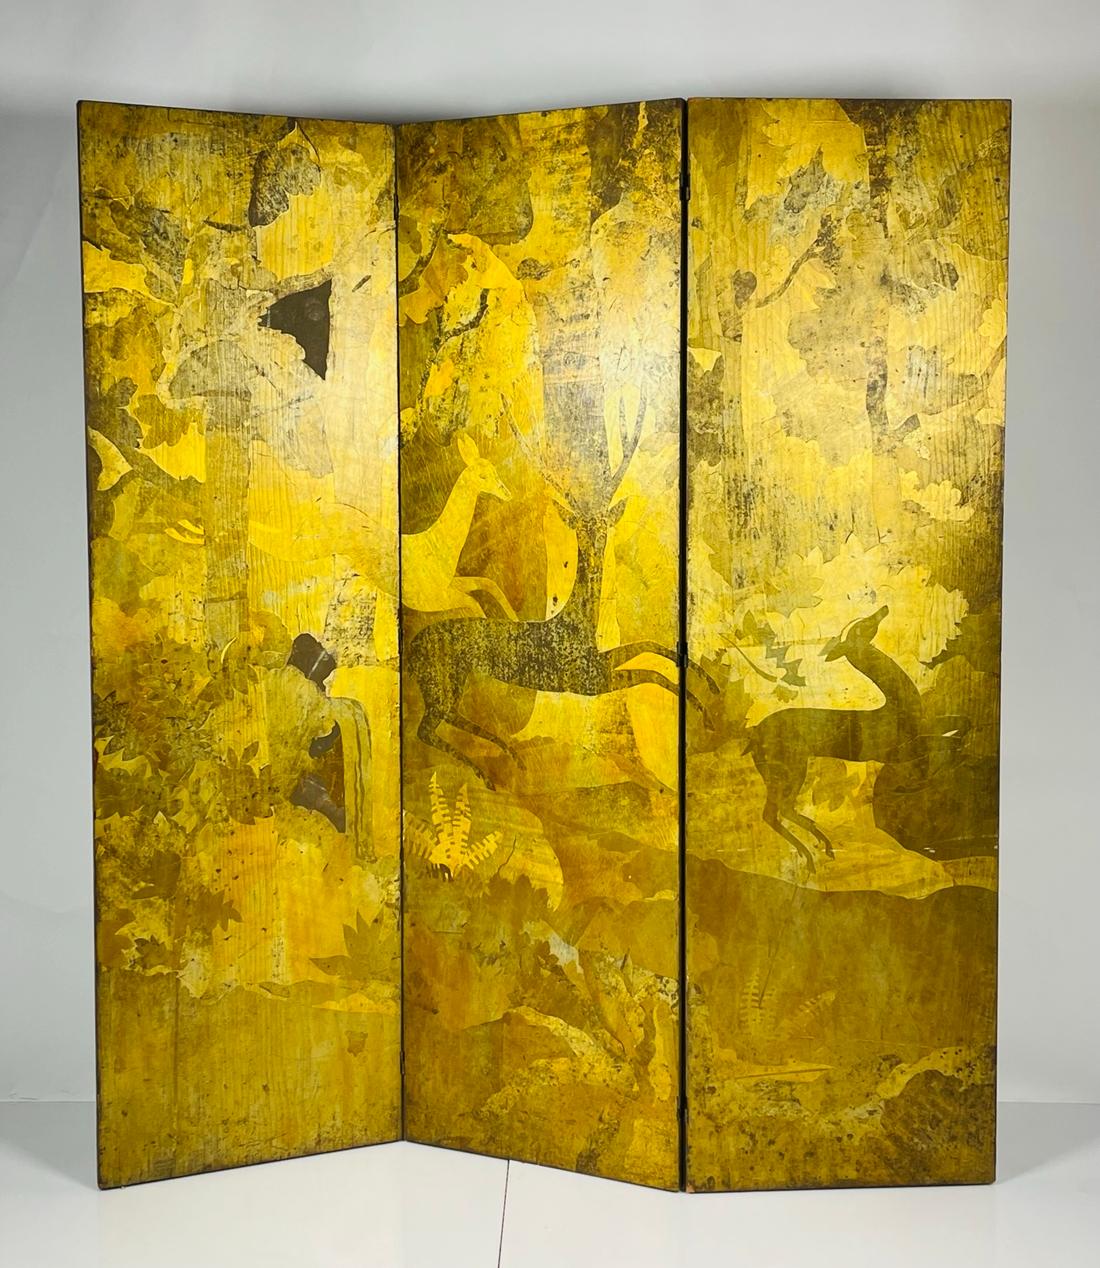 Mid-20th Century Vintage Folding Screen/Room Divider with Gold Leaf Flora & Fauna Details For Sale